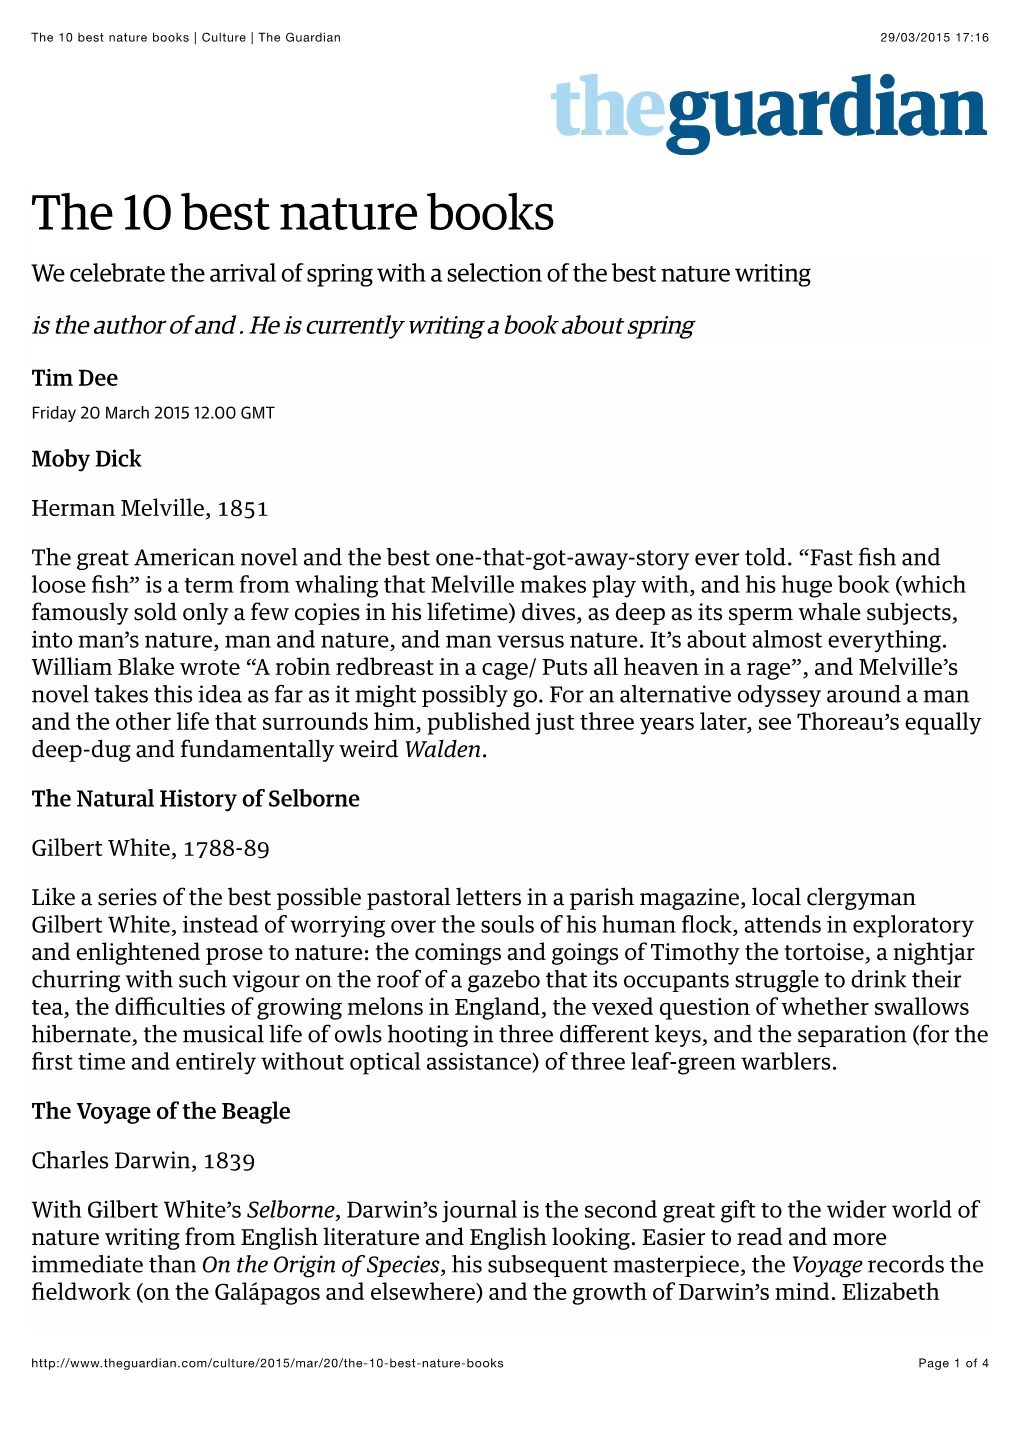 The 10 Best Nature Books | Culture | the Guardian 29/03/2015 17:16